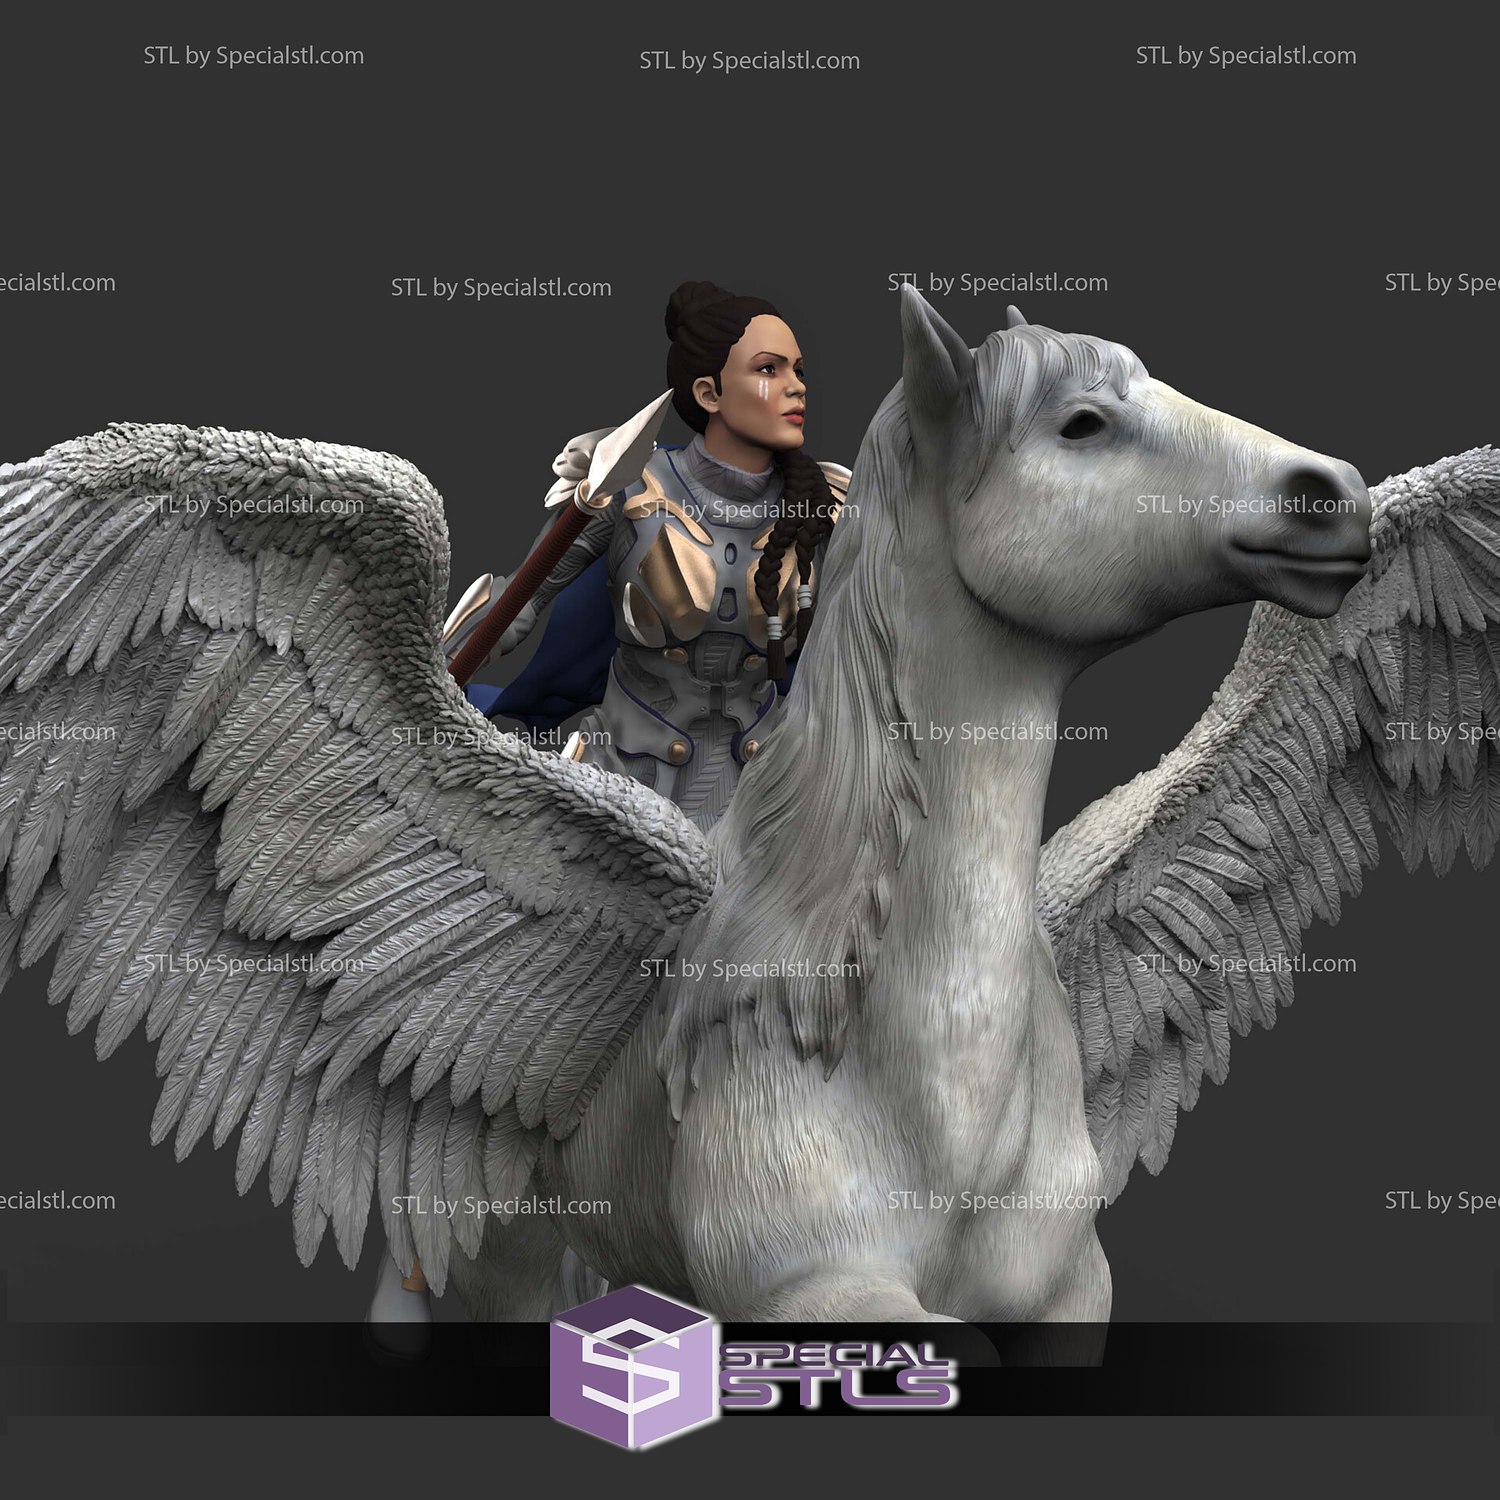 3D Printable Valkyrie by Lord of the Print